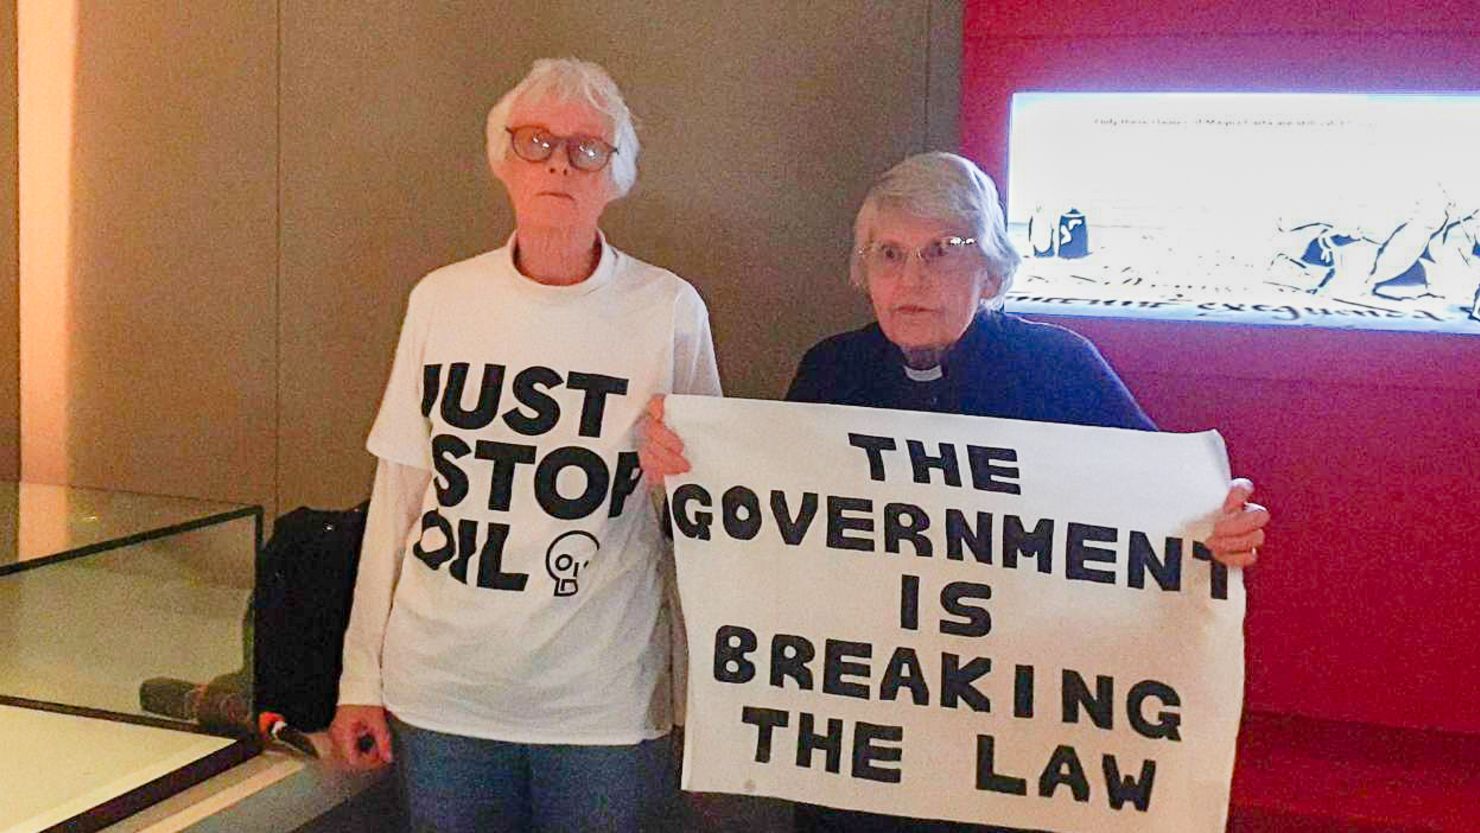 Just Stop Oil supporters Judy Bruce, 85, and Reverend Sue Parfitt, 82, smashed the protective enclosure around the historic Magna Carta document in London's British Library.